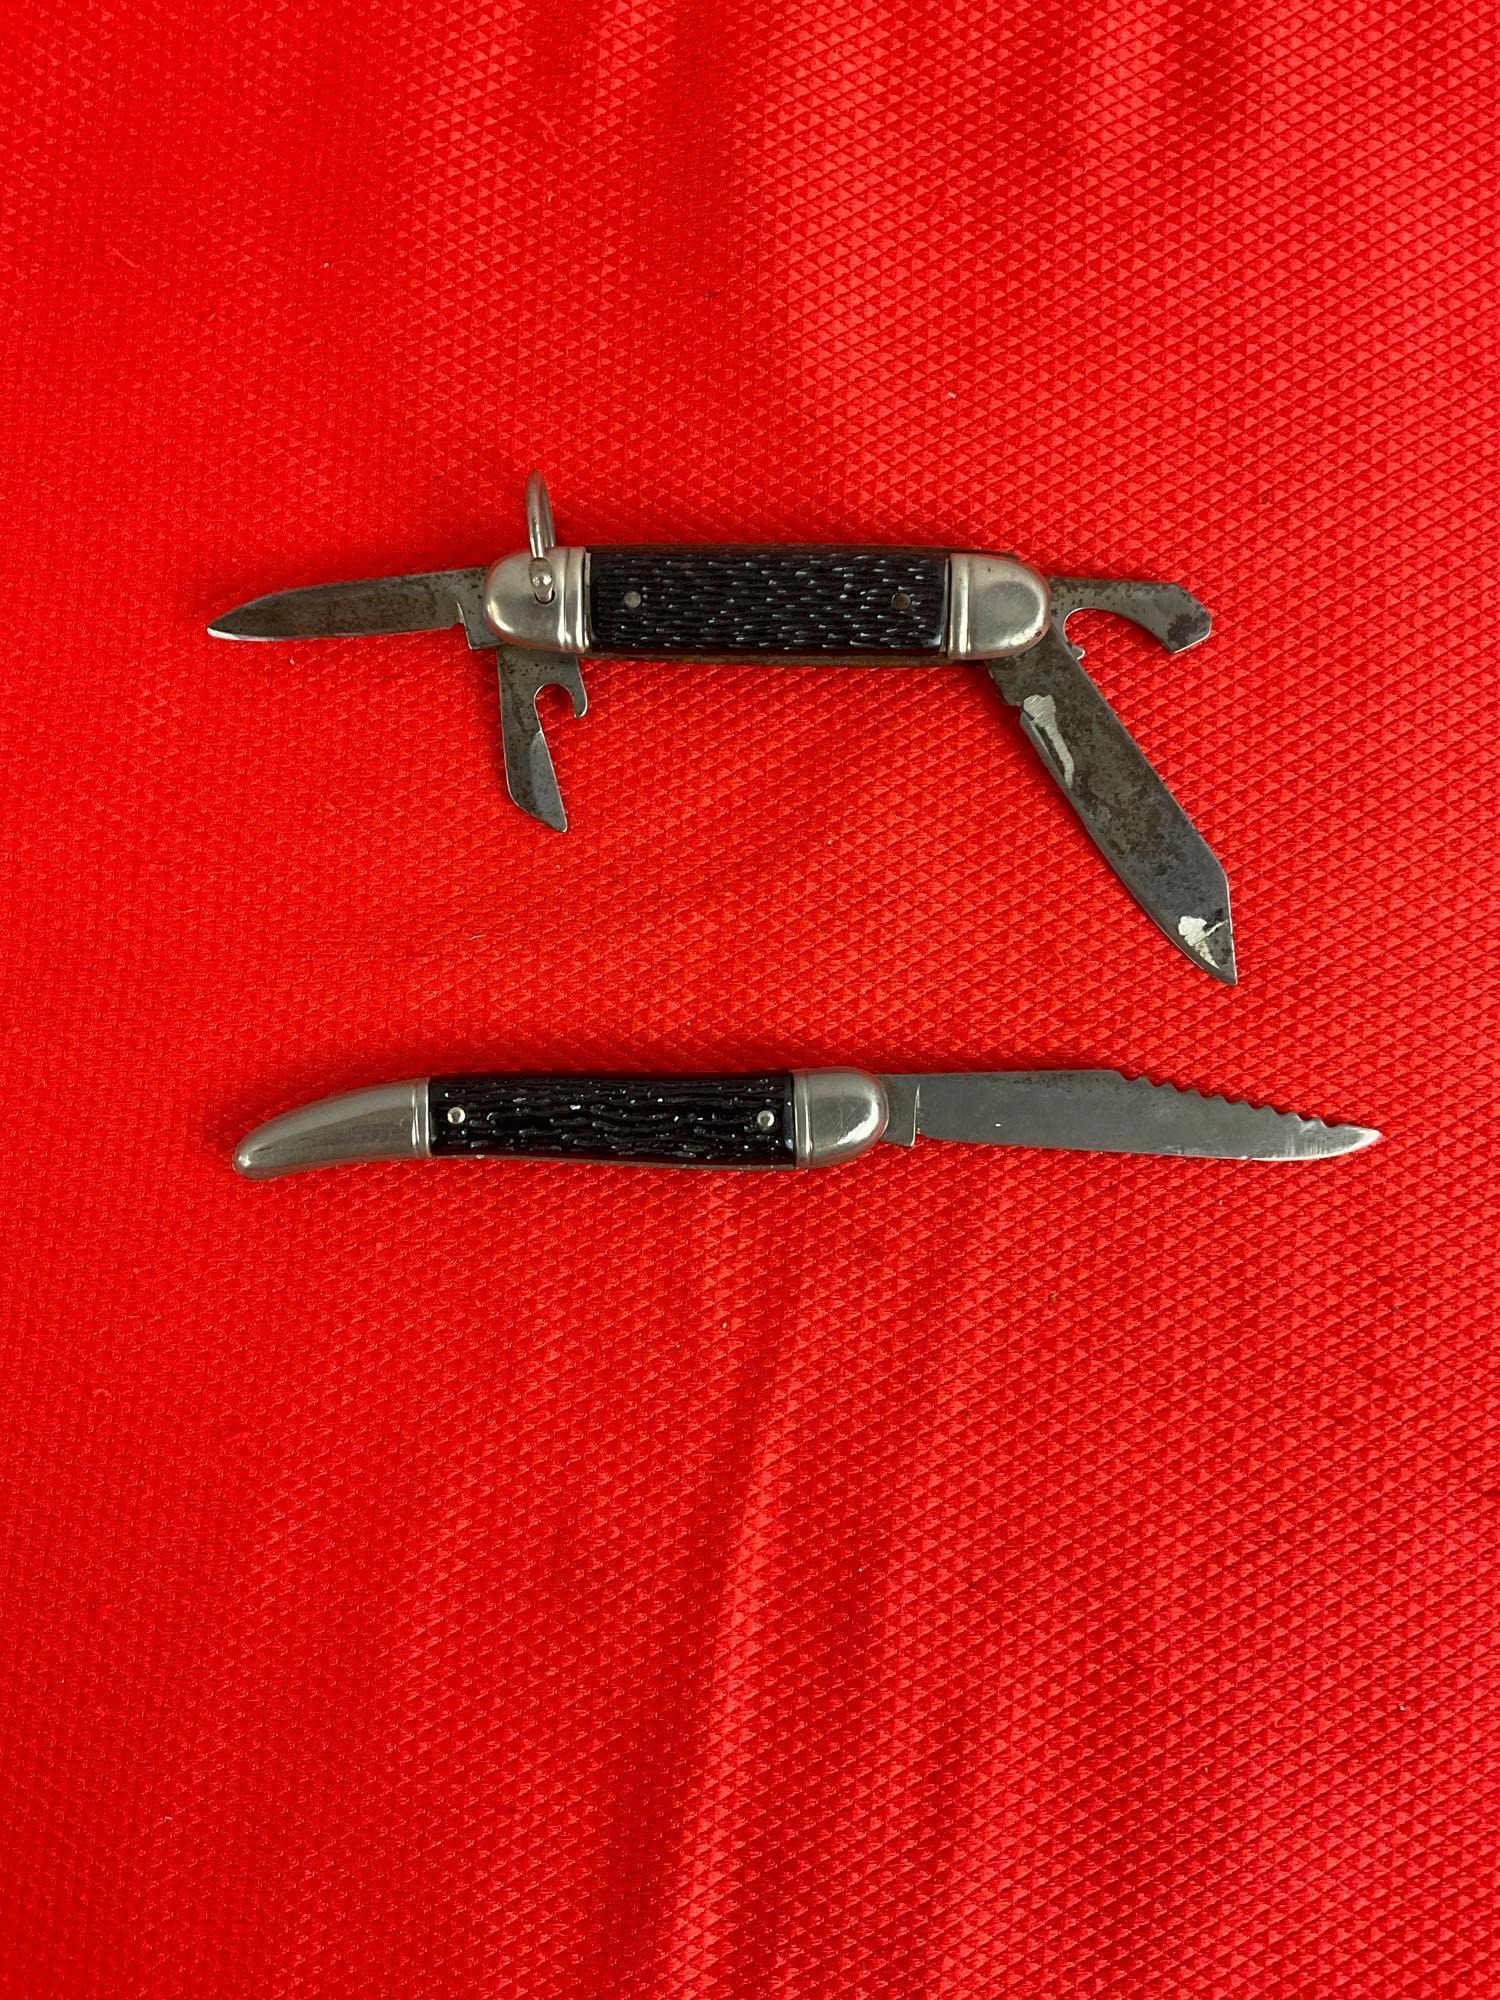 2 pcs Vintage Steel Folding Knives. Colonial Prov. USA "Fish-King" & The Ideal "Camper." See pics.